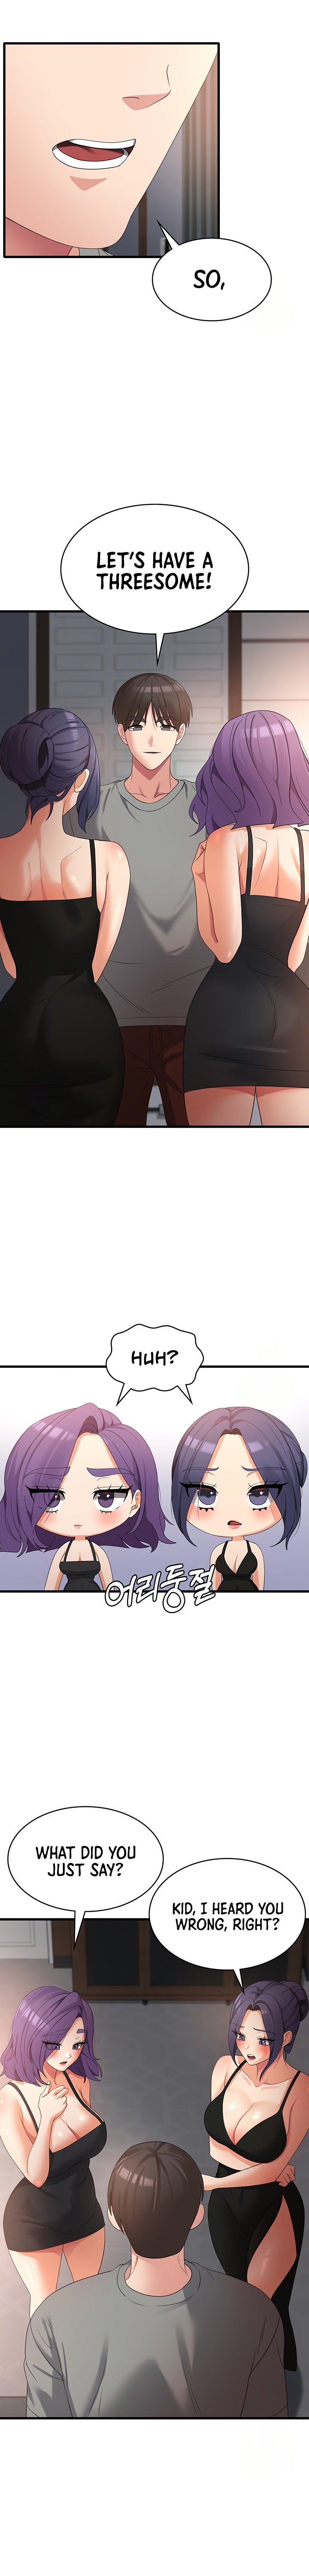 sexy-man-and-woman-chap-35-9